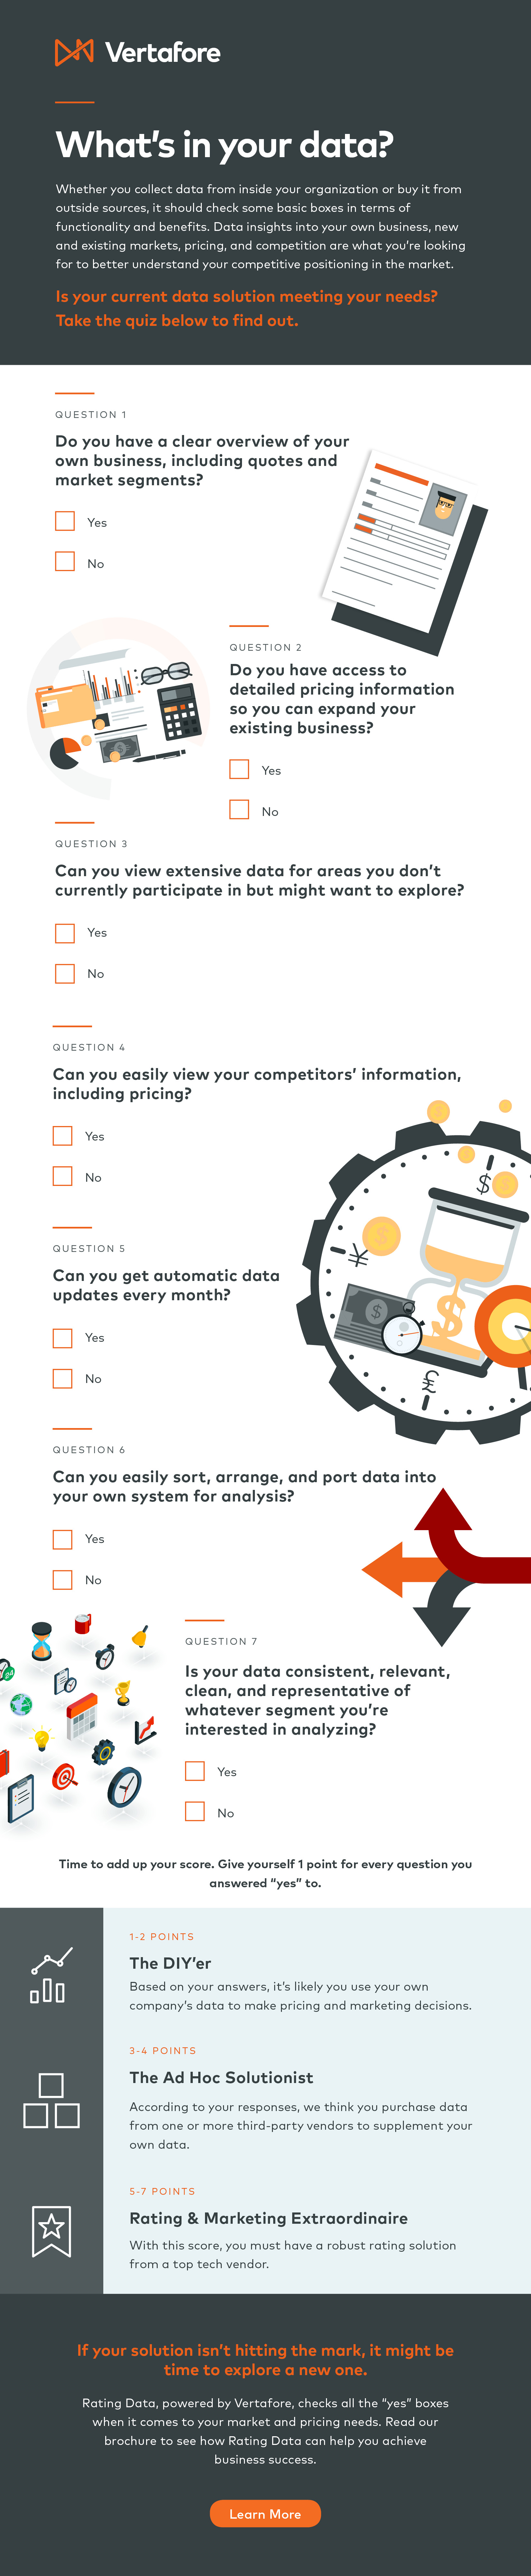 Quiz: What's in your data? Infographic